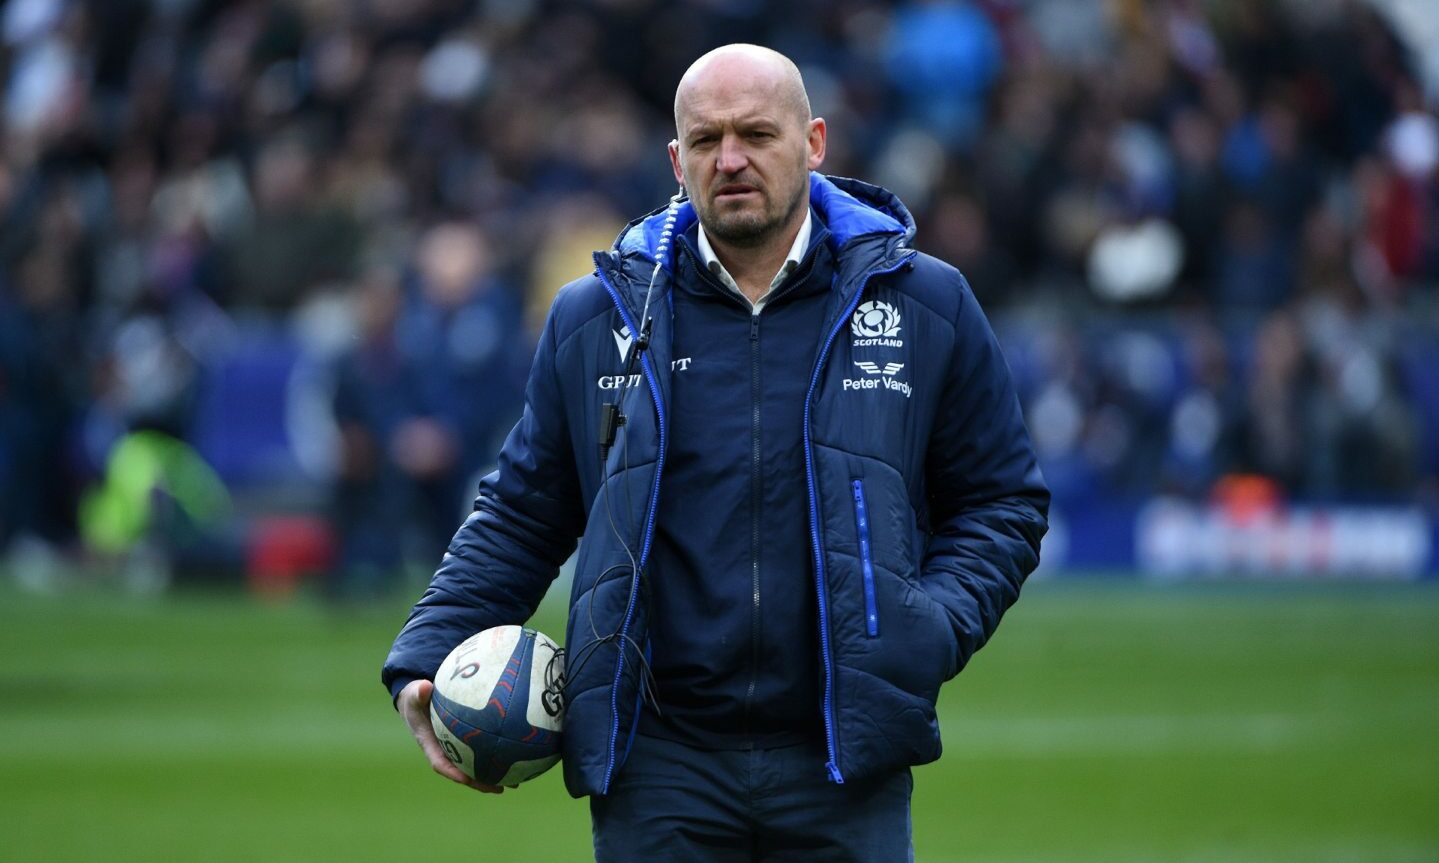 Gregor Townsend on a sportsfield holding a rugby ball under his arm walking towards camera. 